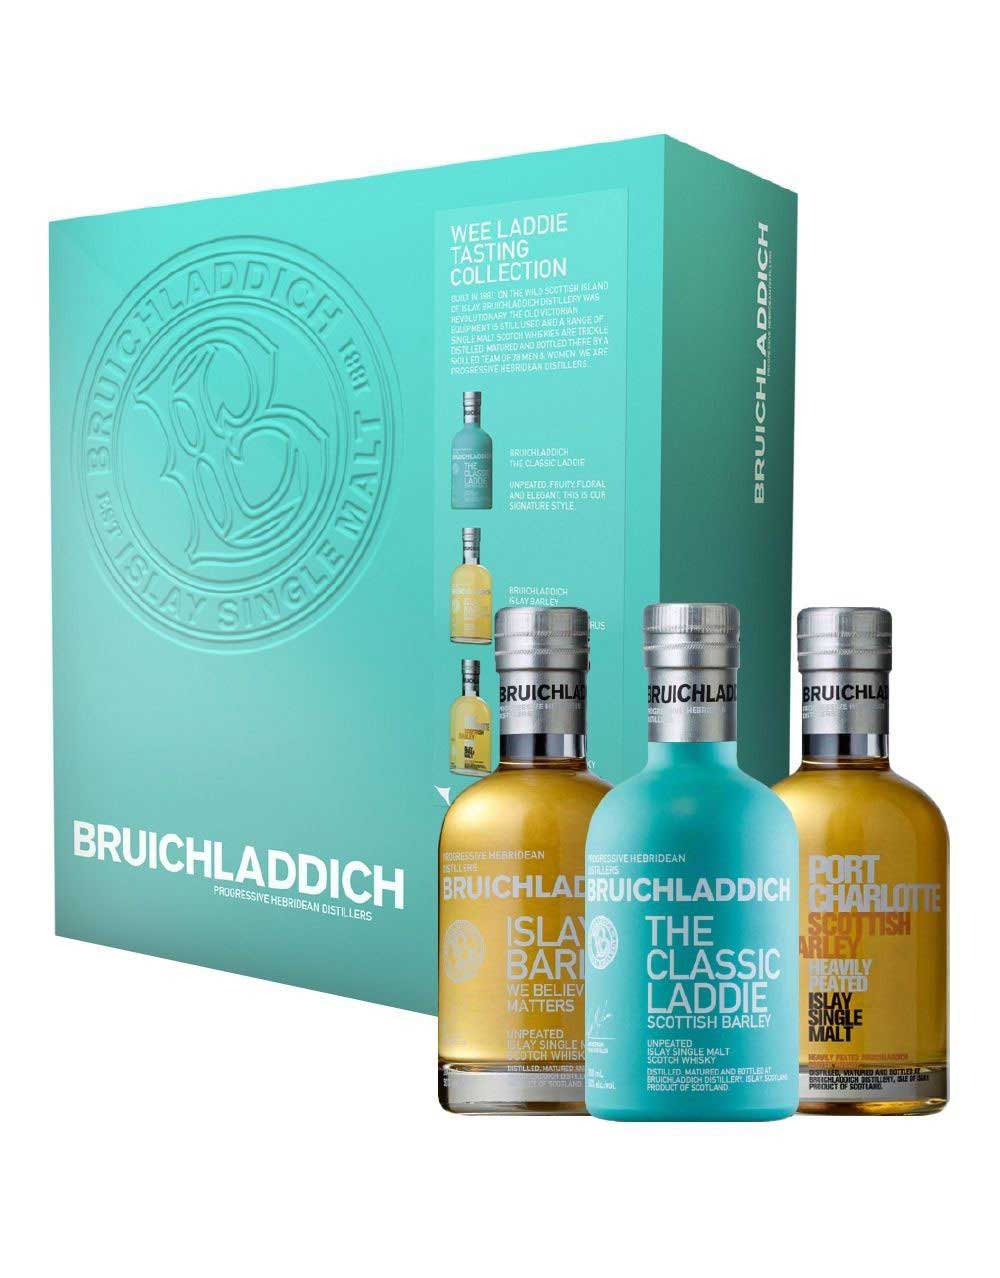 The Sassenach Blended Limited Edition Scotch Whisky